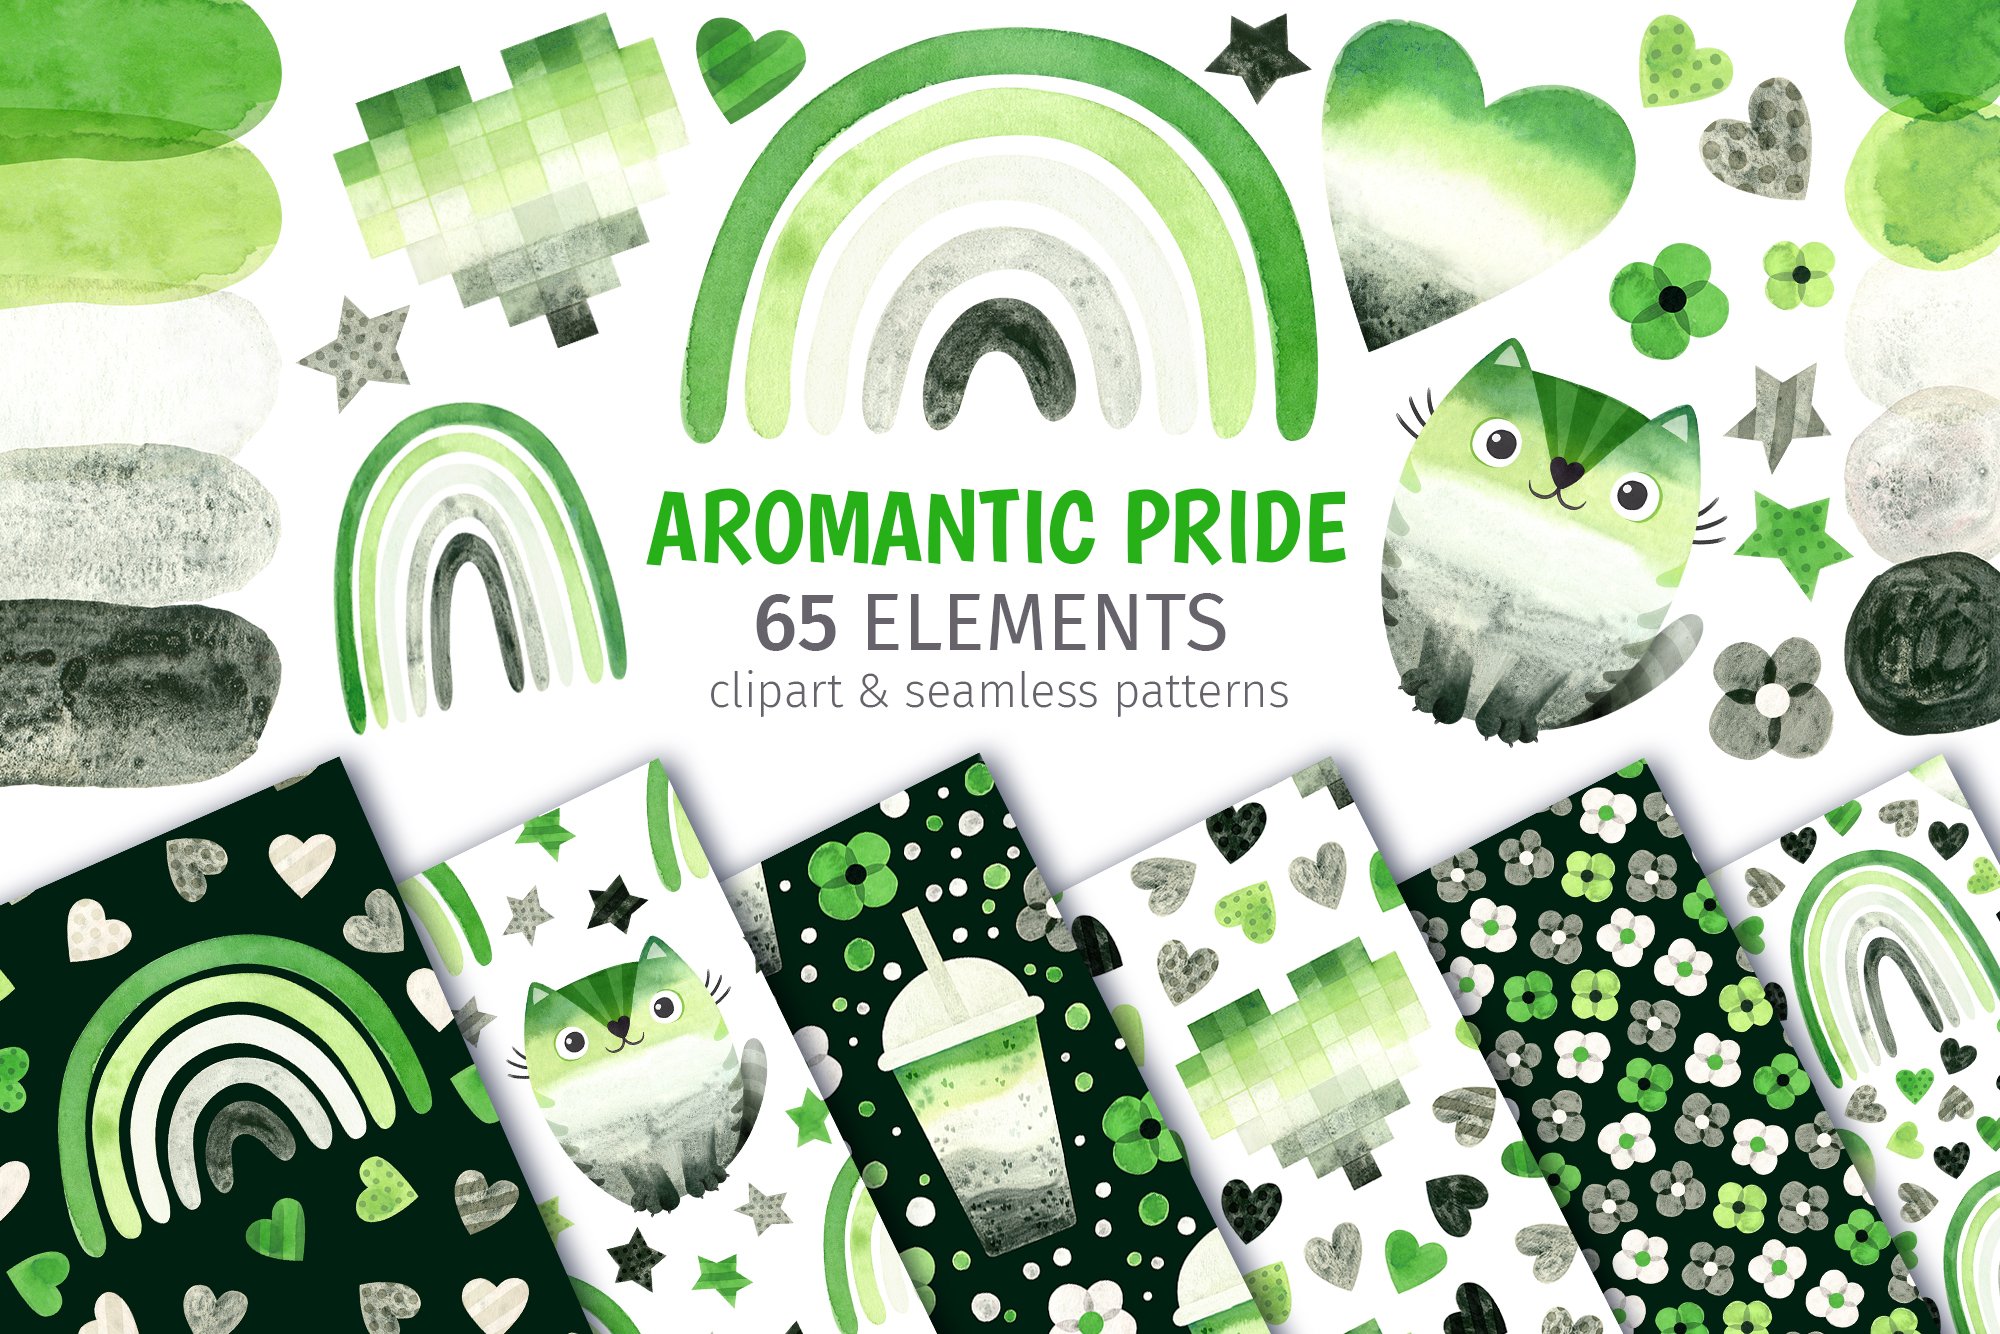 Aromantic pride clipart and patterns cover image.